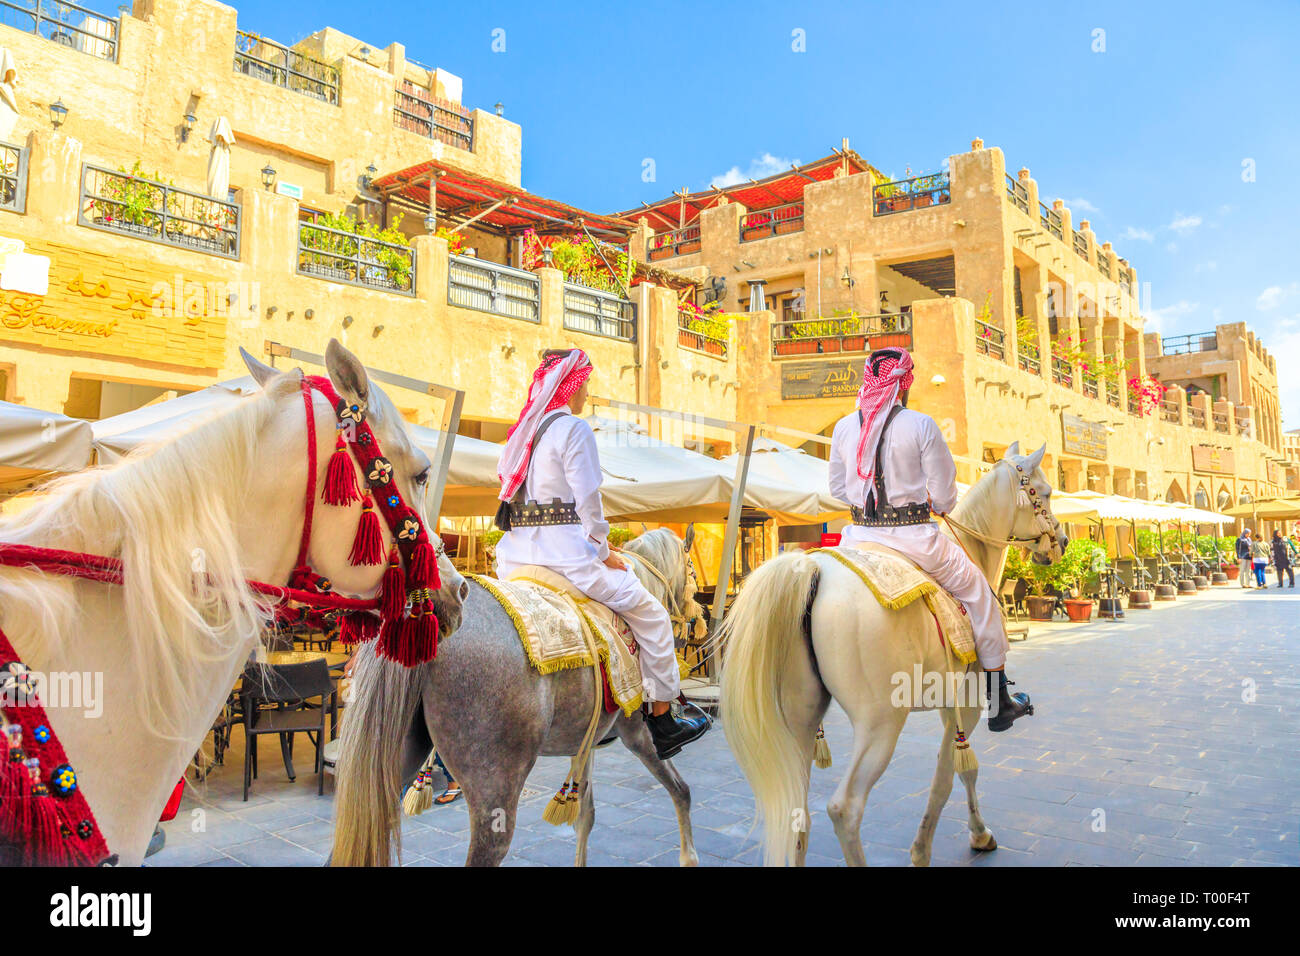 Doha, Qatar - February 20, 2019: heritage Police Officers in traditional 1940s Qatari uniform at old Souq Waqif riding white Arabian Horses on Stock Photo